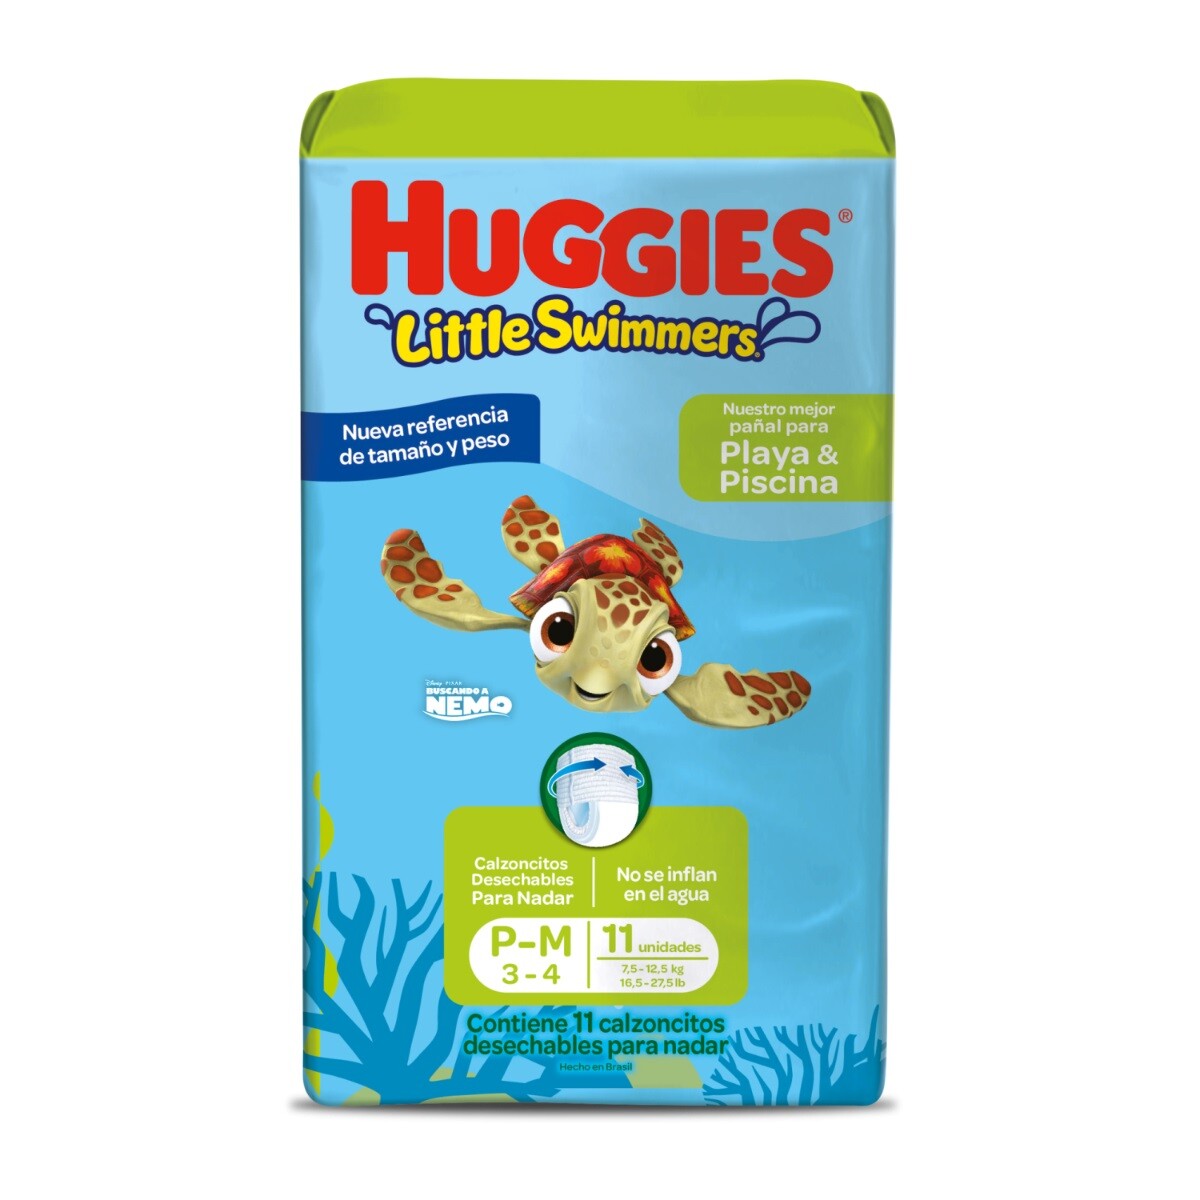 Pañales Huggies Little Swimmers Talle P - M 11 Uds. 